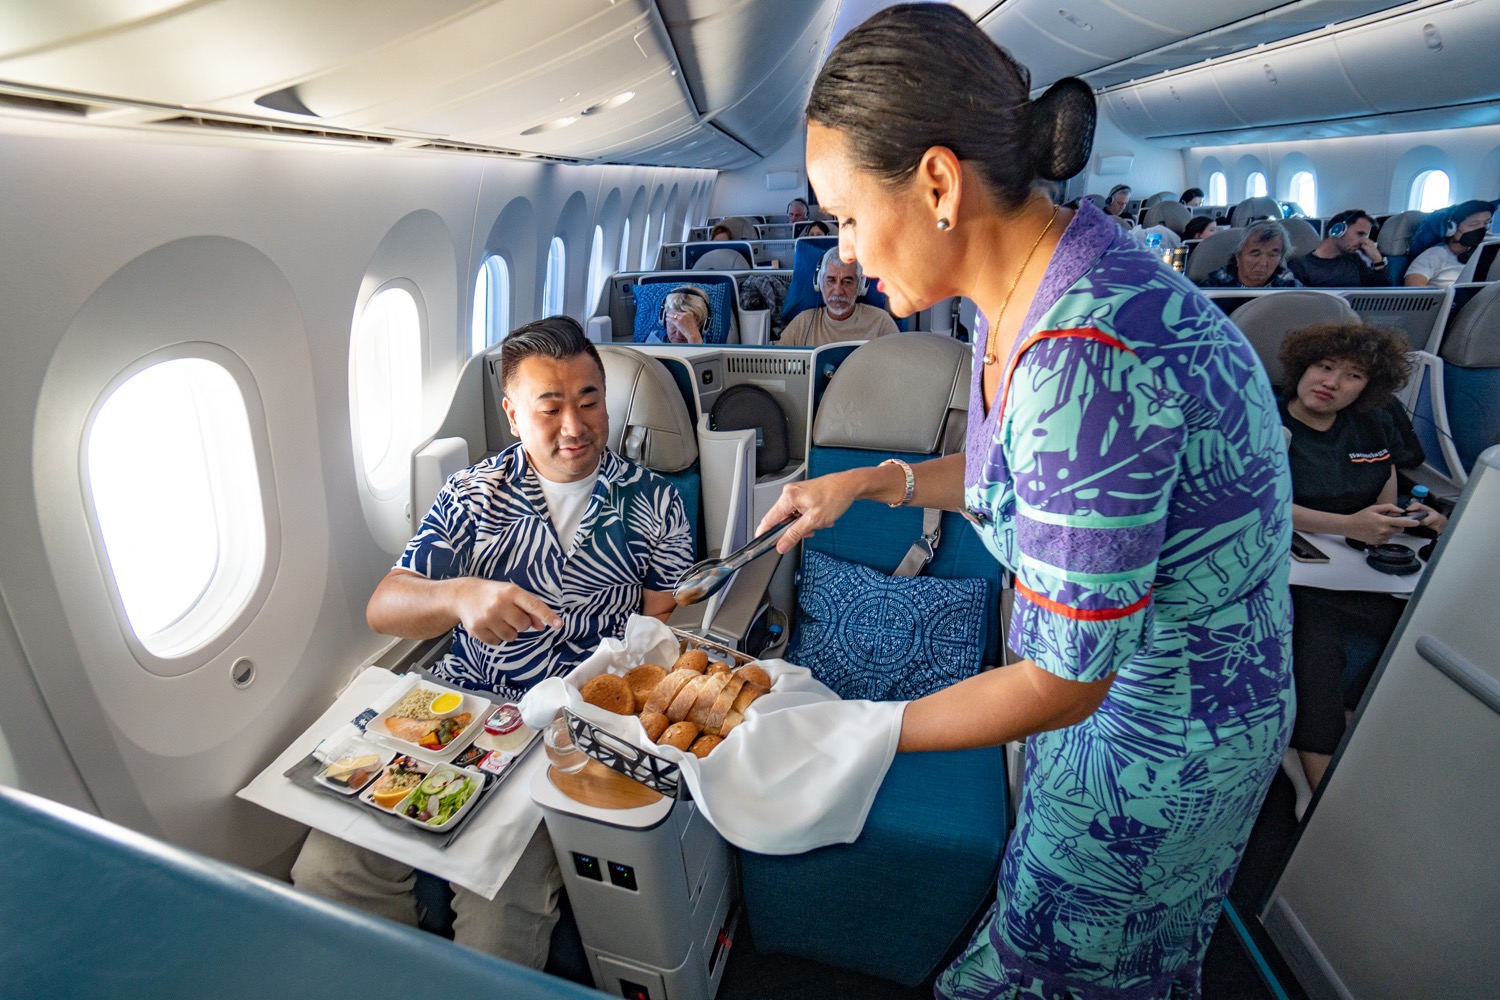 a woman serving food to a man on an airplane